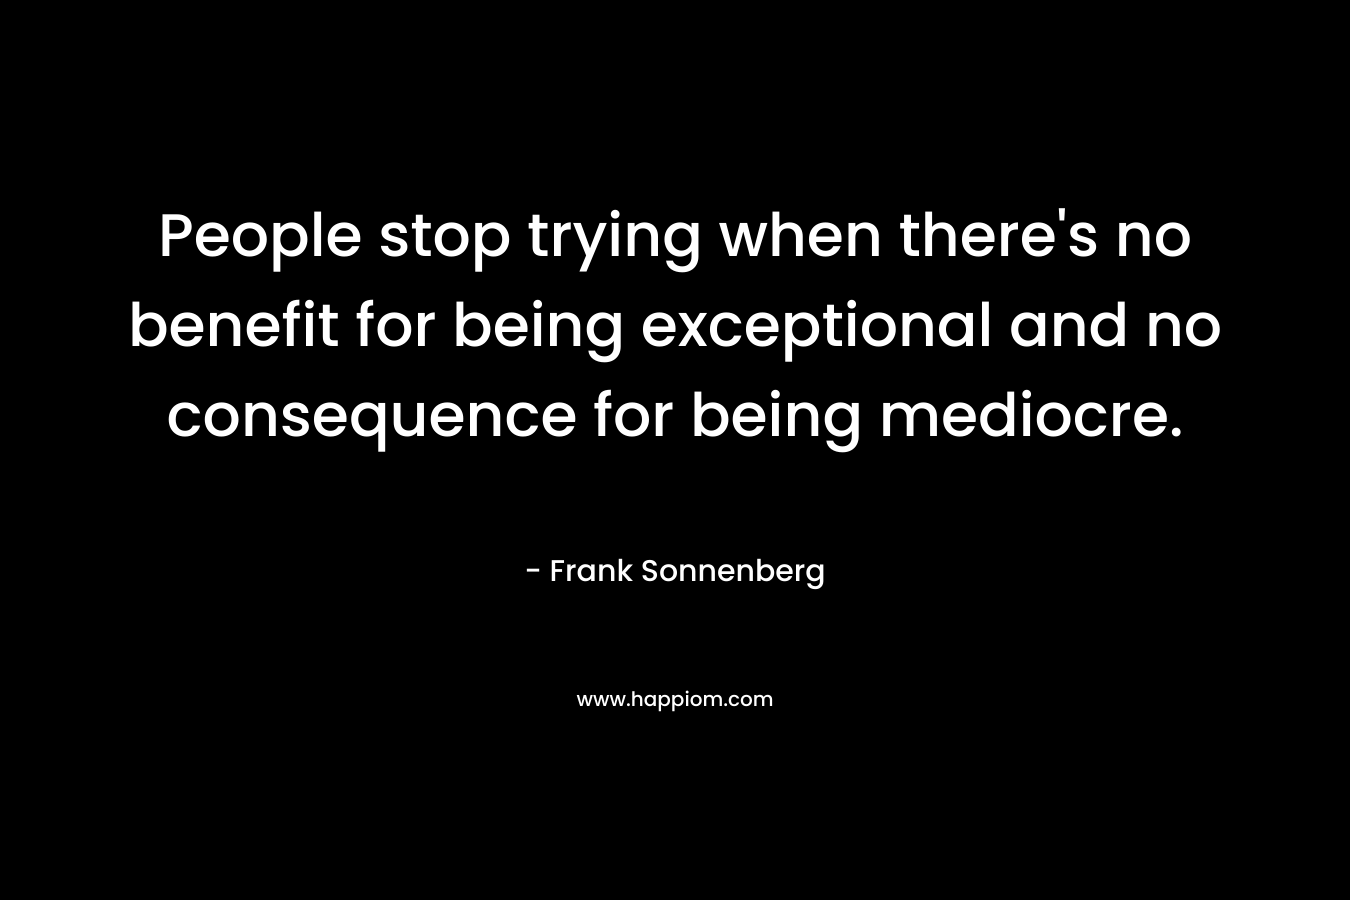 People stop trying when there's no benefit for being exceptional and no consequence for being mediocre.